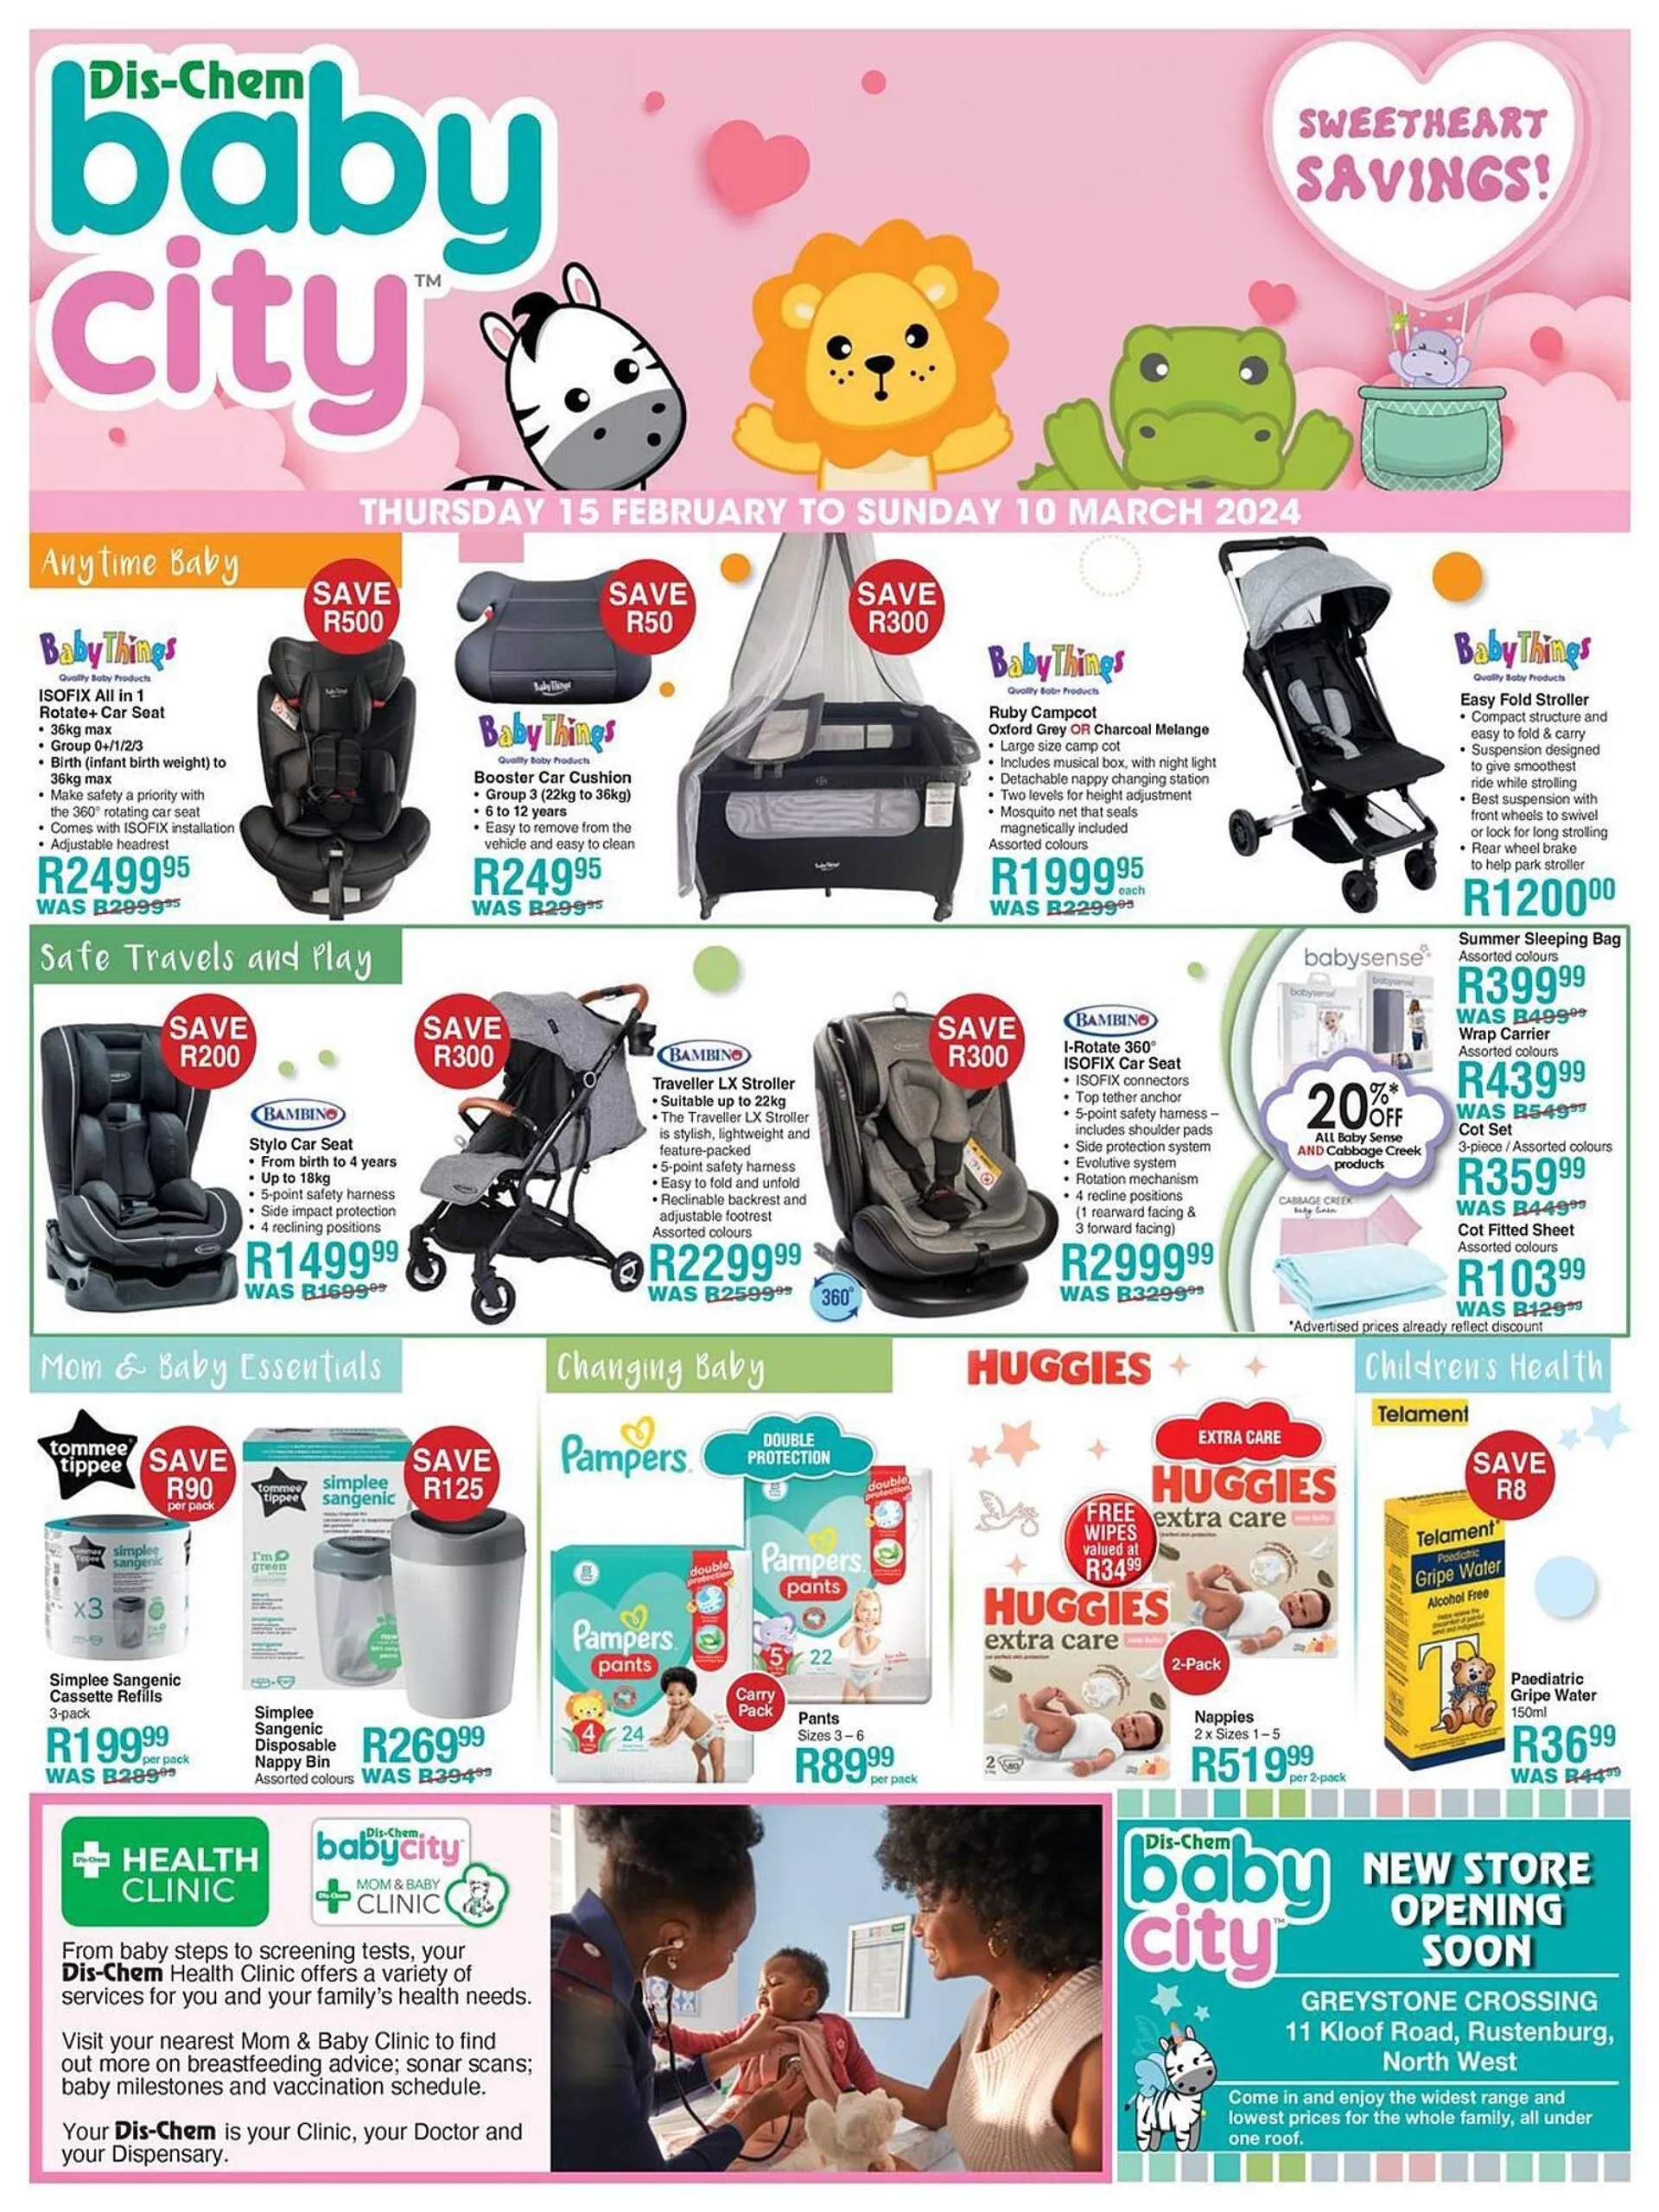 Baby City catalogue - 1 March 10 March 2024 - Page 1